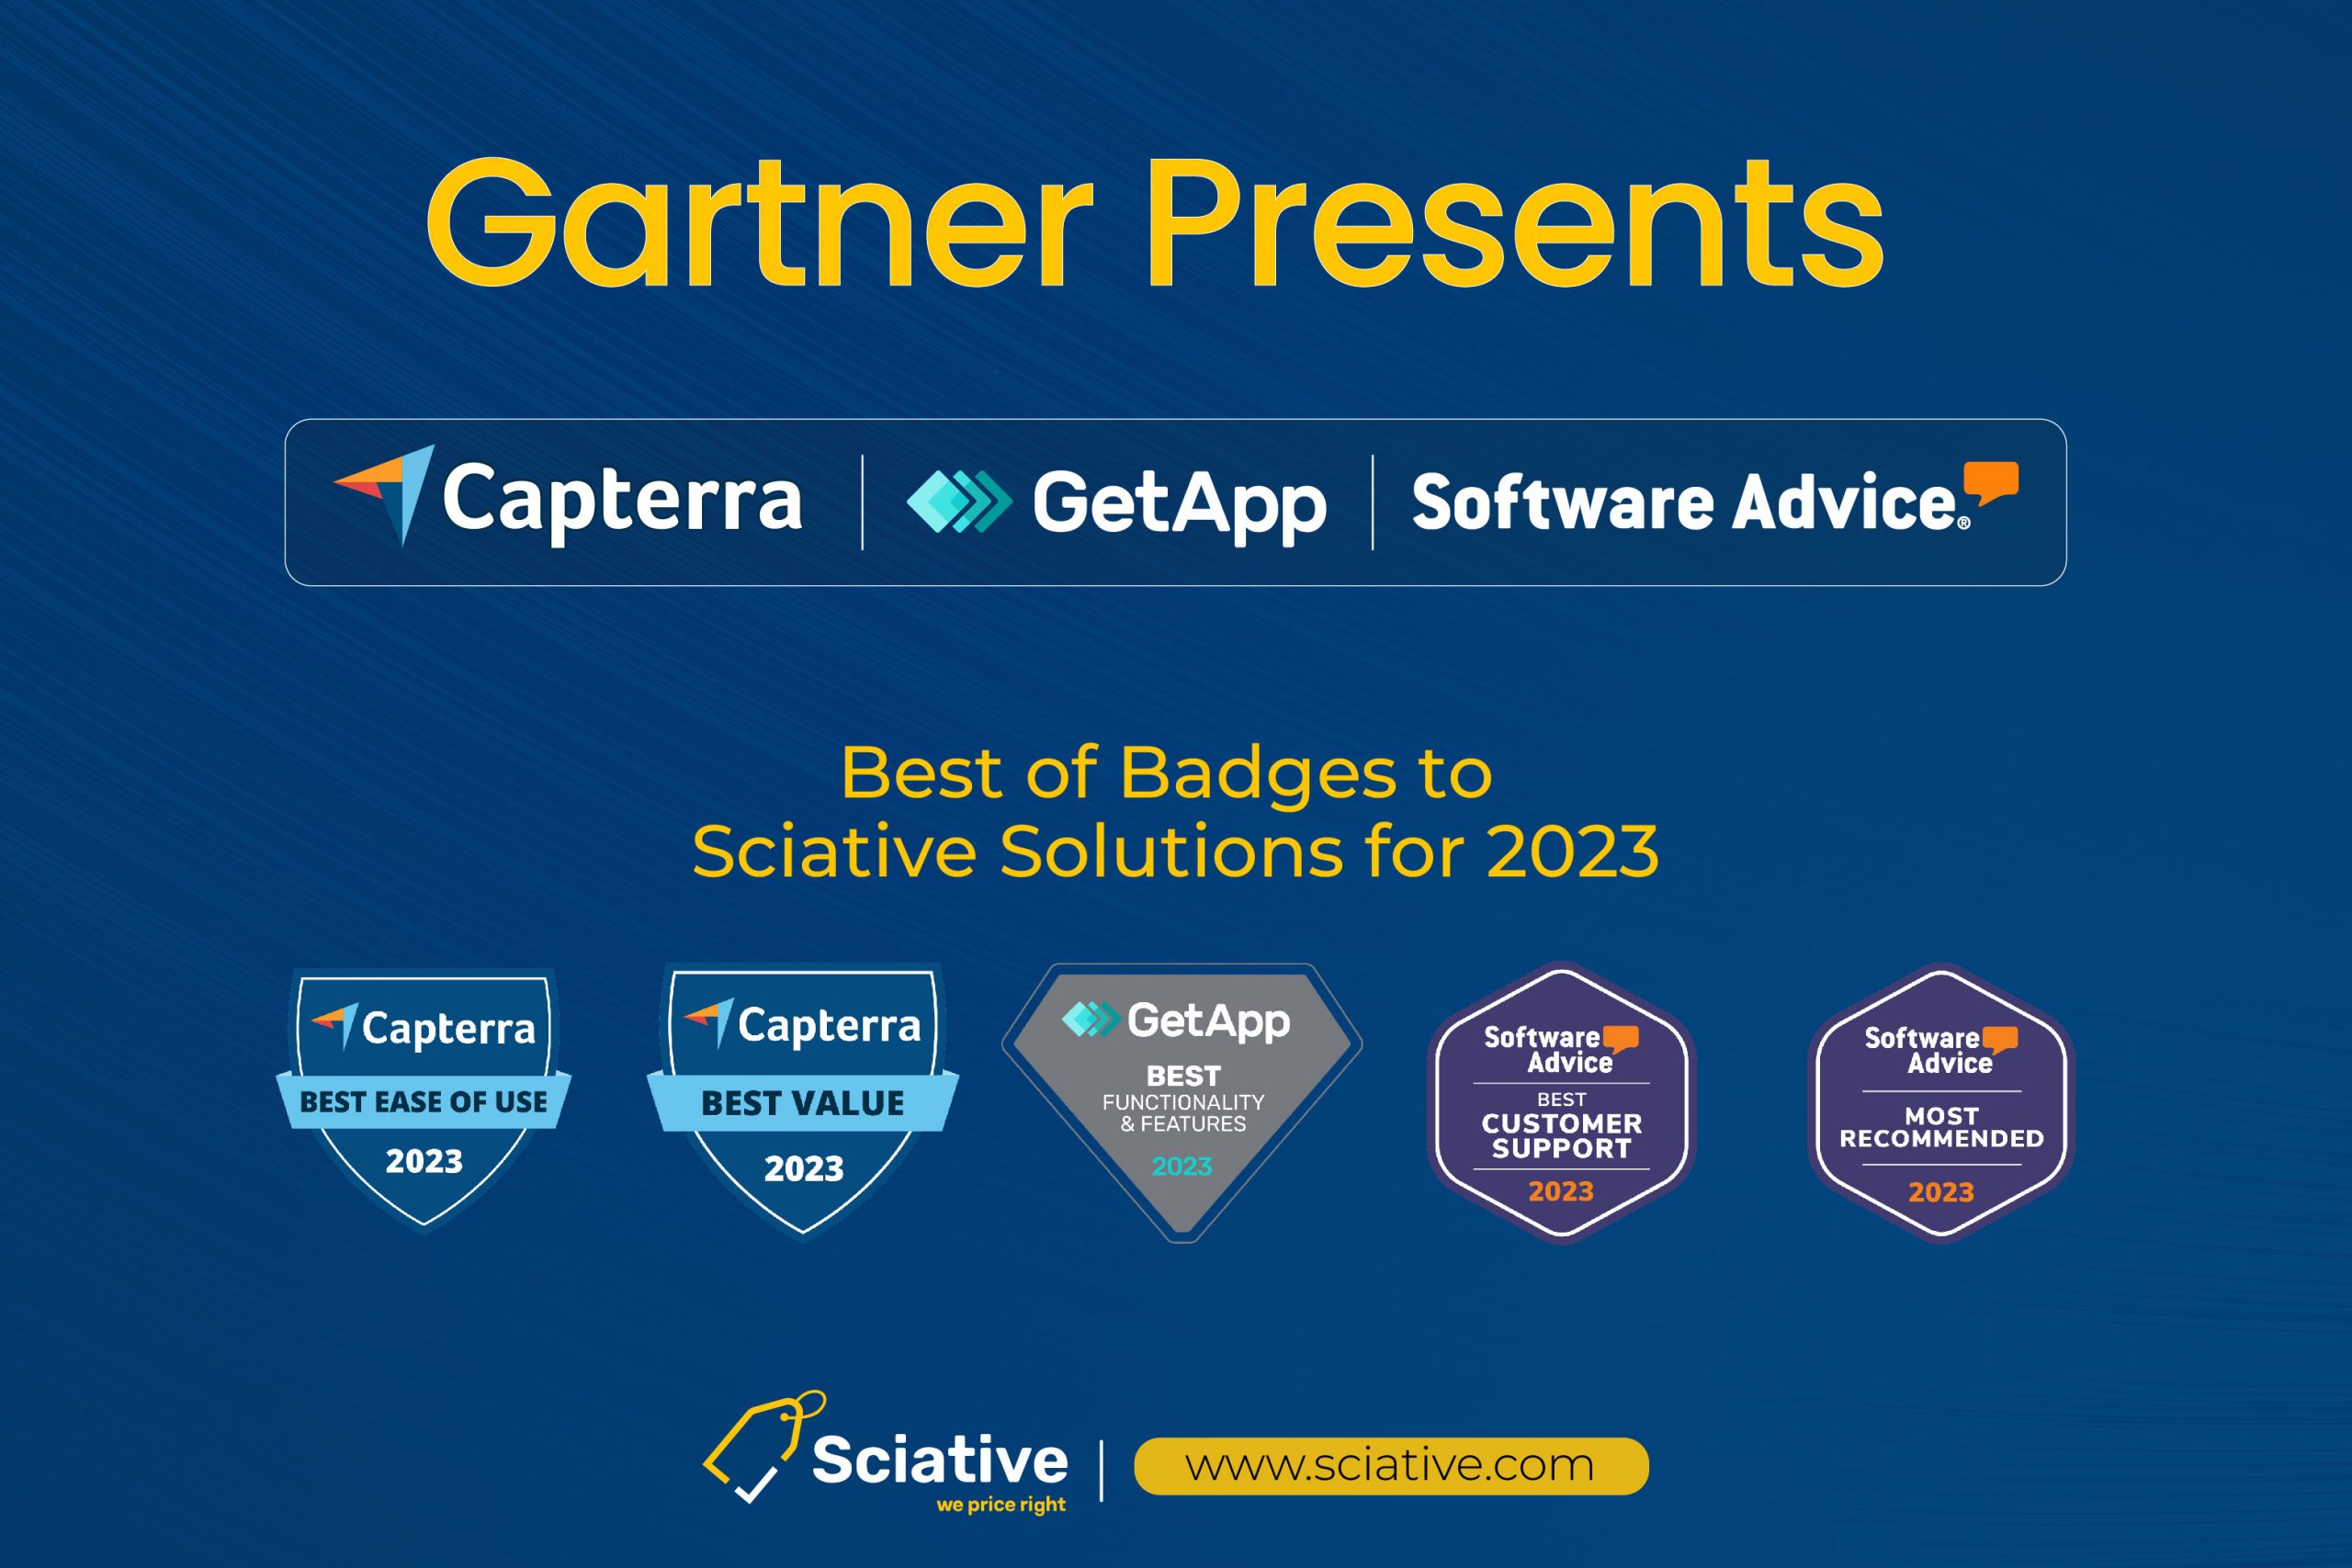 Sciative Solutions recognized with the Best of Badges from Gartner